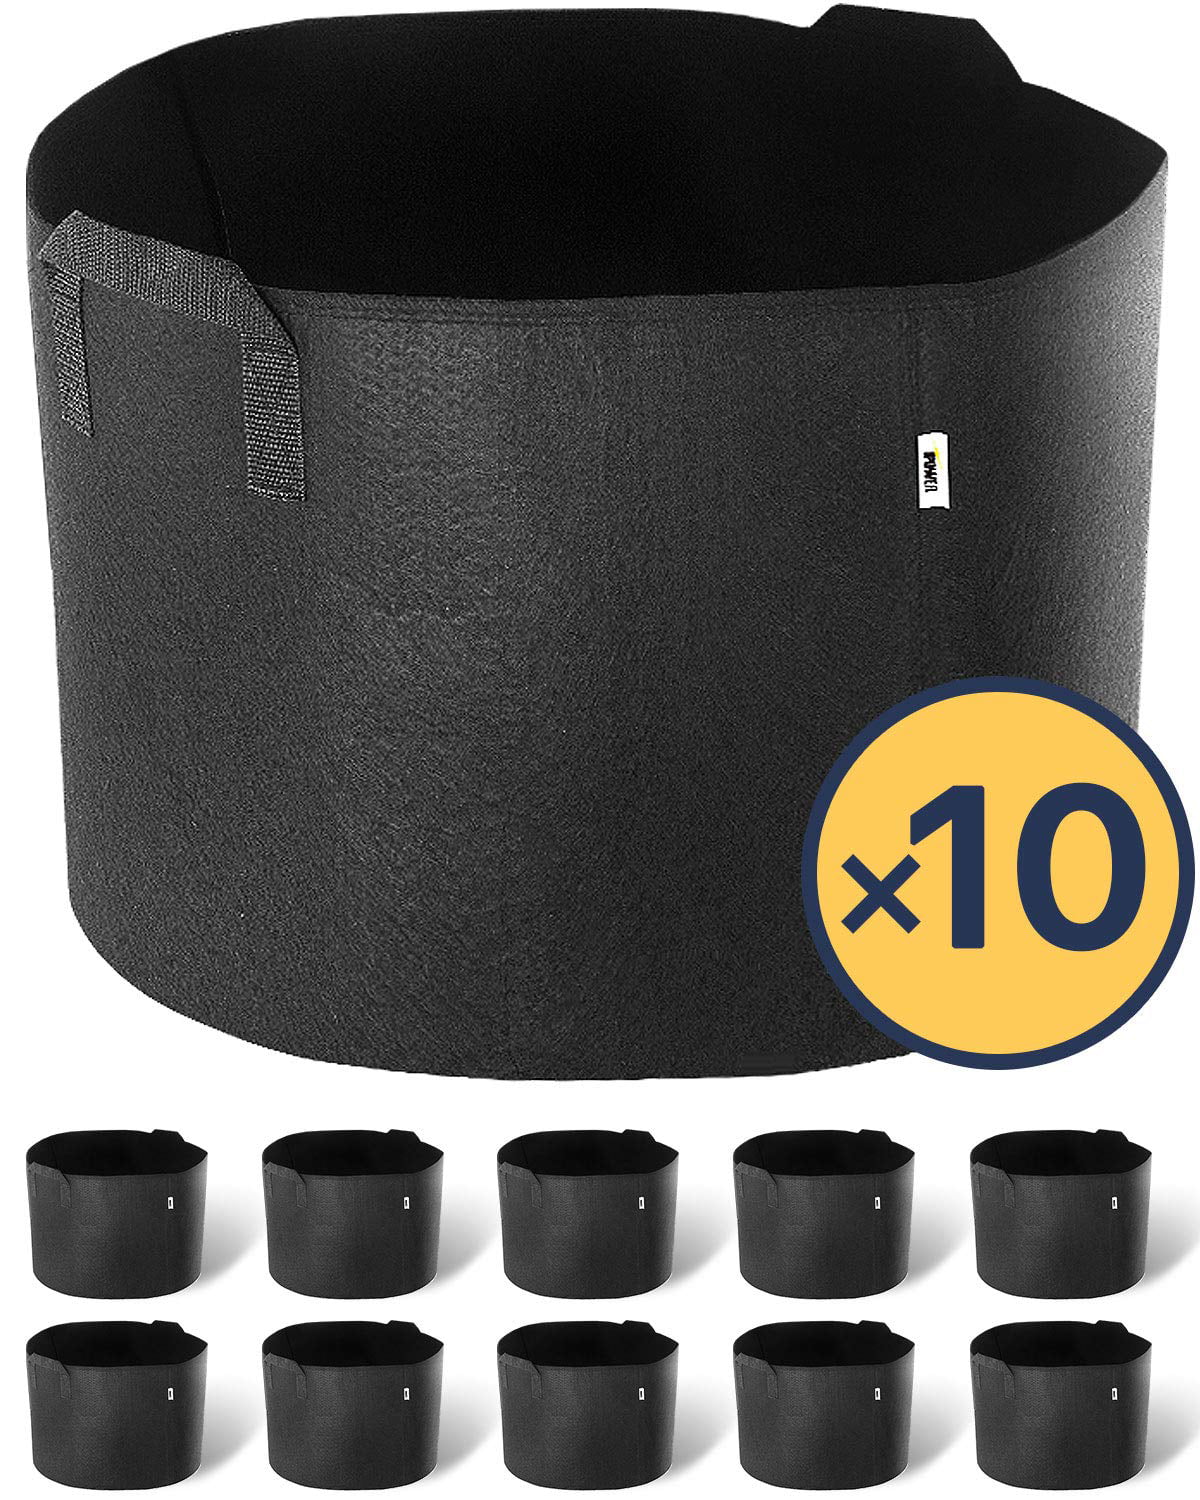 10 Gallon Black Smart Pots with Handles 5 or 10 Pack Fabric Grow Container 1 